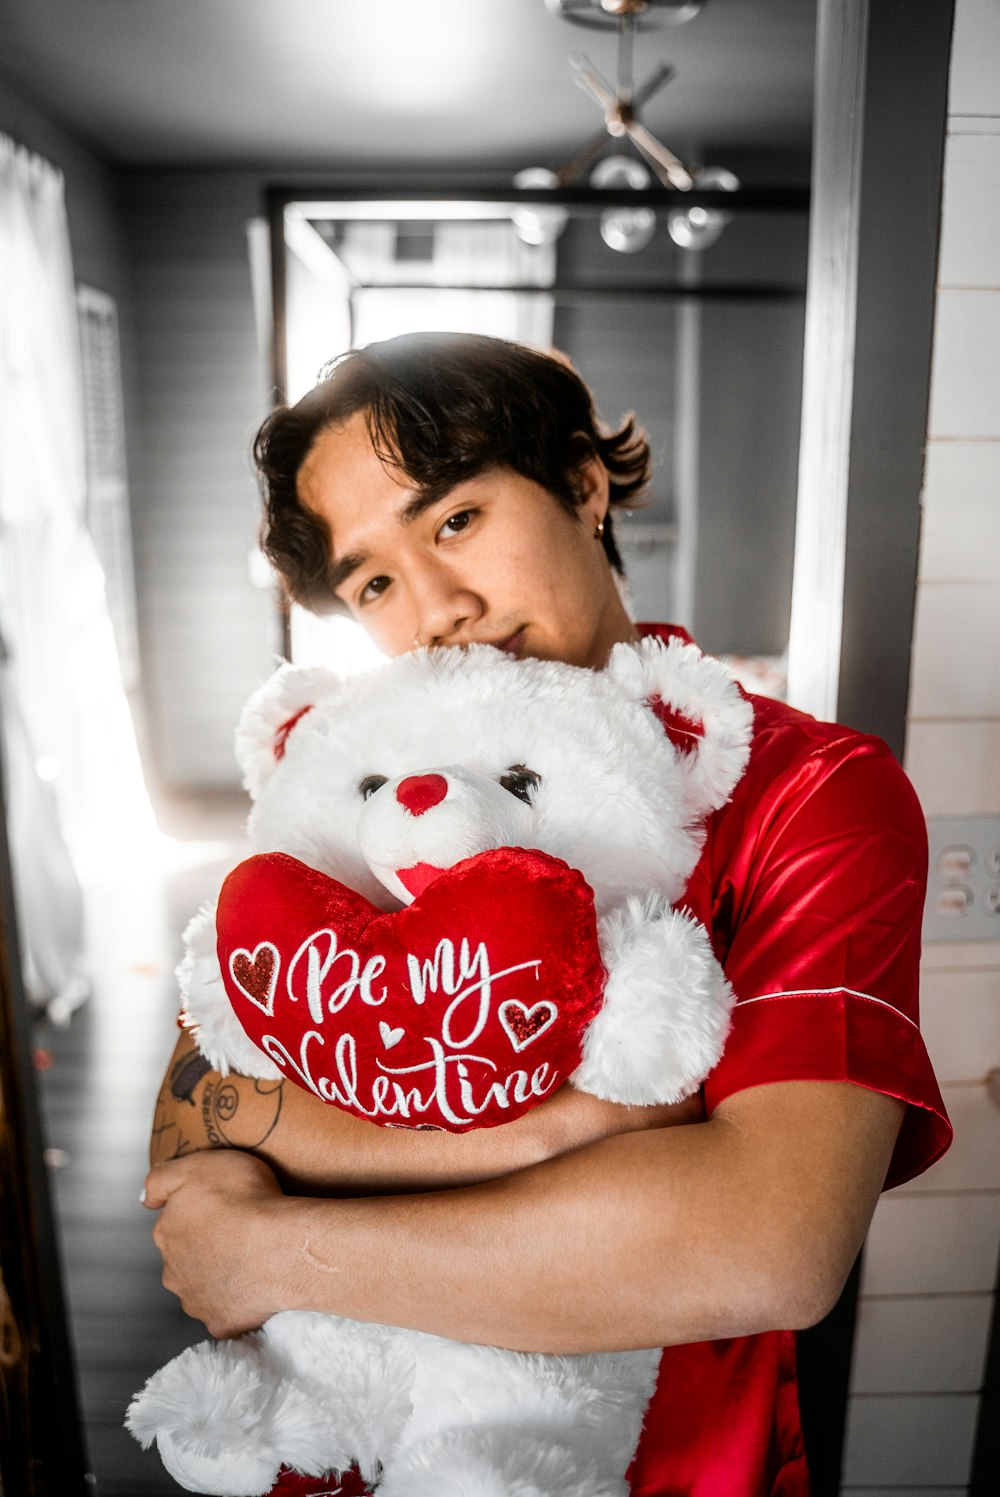 girl in red t-shirt holding white bear plush toy